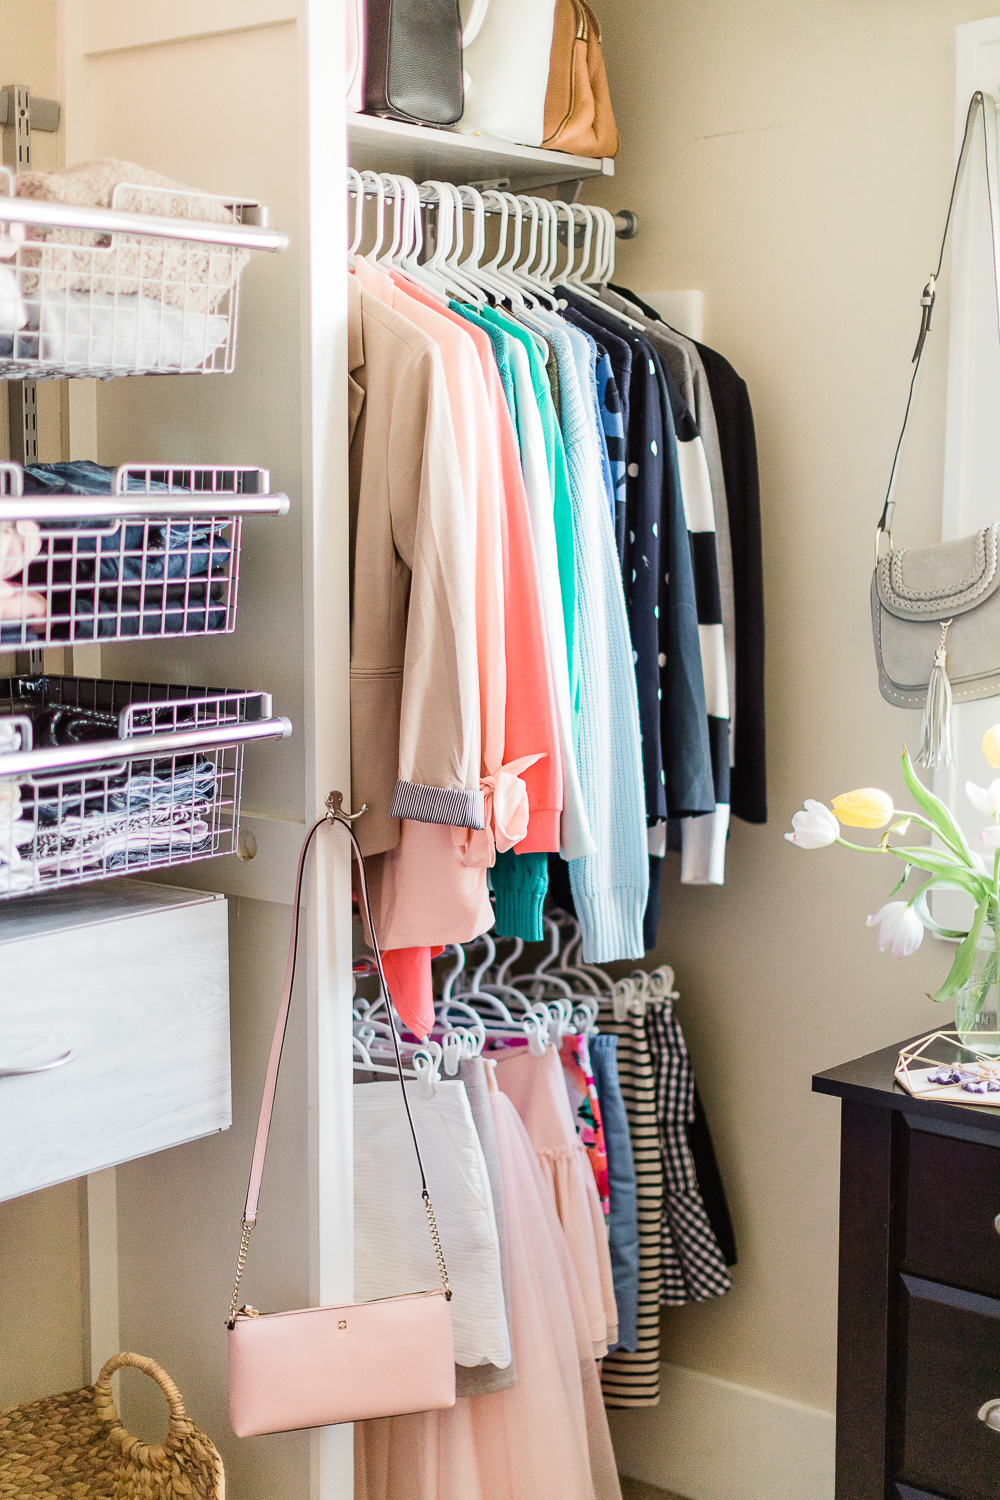 How To: Refresh Your Closet with a Rubbermaid FastTrack Closet System by Stephanie Ziajka from the popular southern lifestyle blog Diary of a Debutante, Rubbermaid FastTrack Closet Organization System review and install, affordable custom closet system